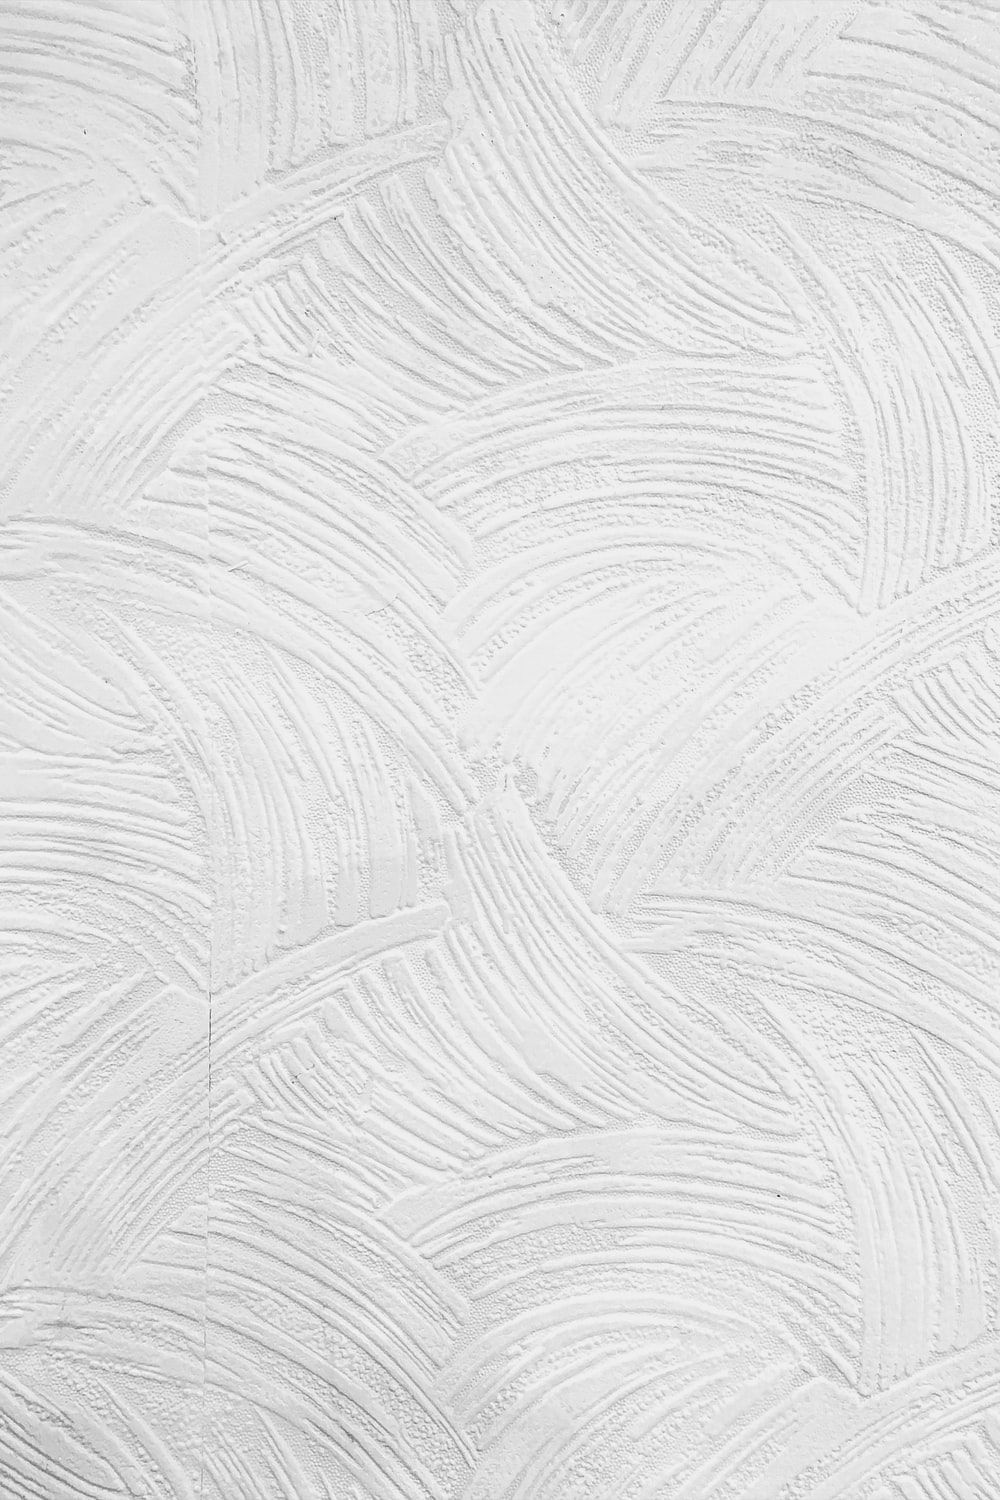 White Marble Background Picture. Download Free Image